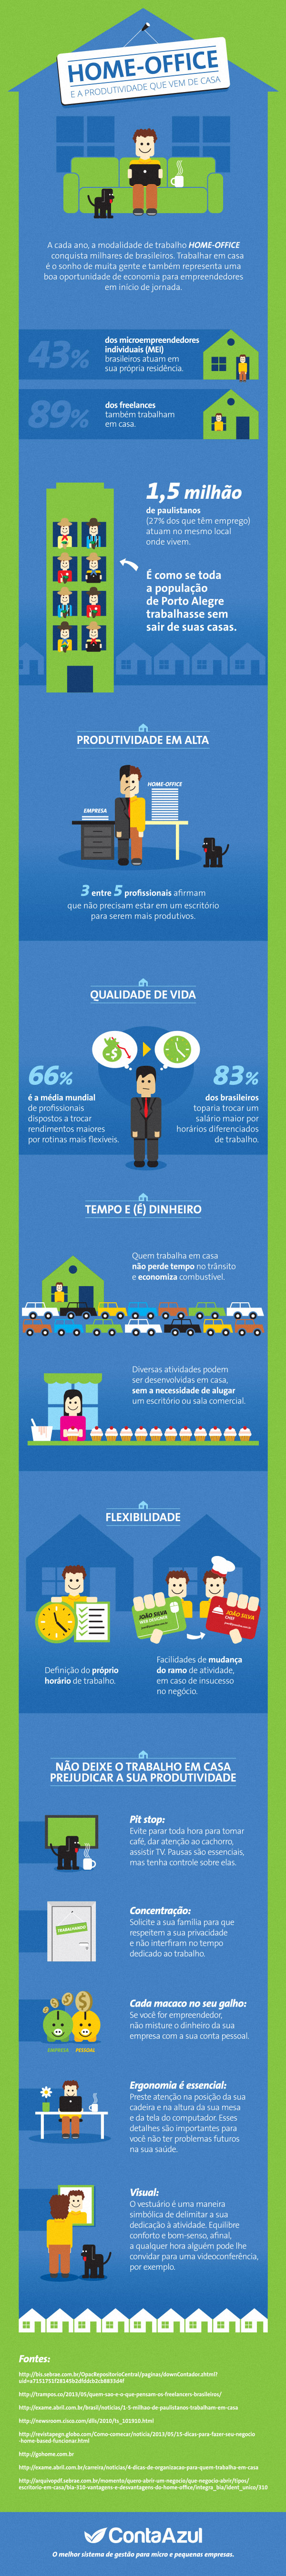 infografico-home-office